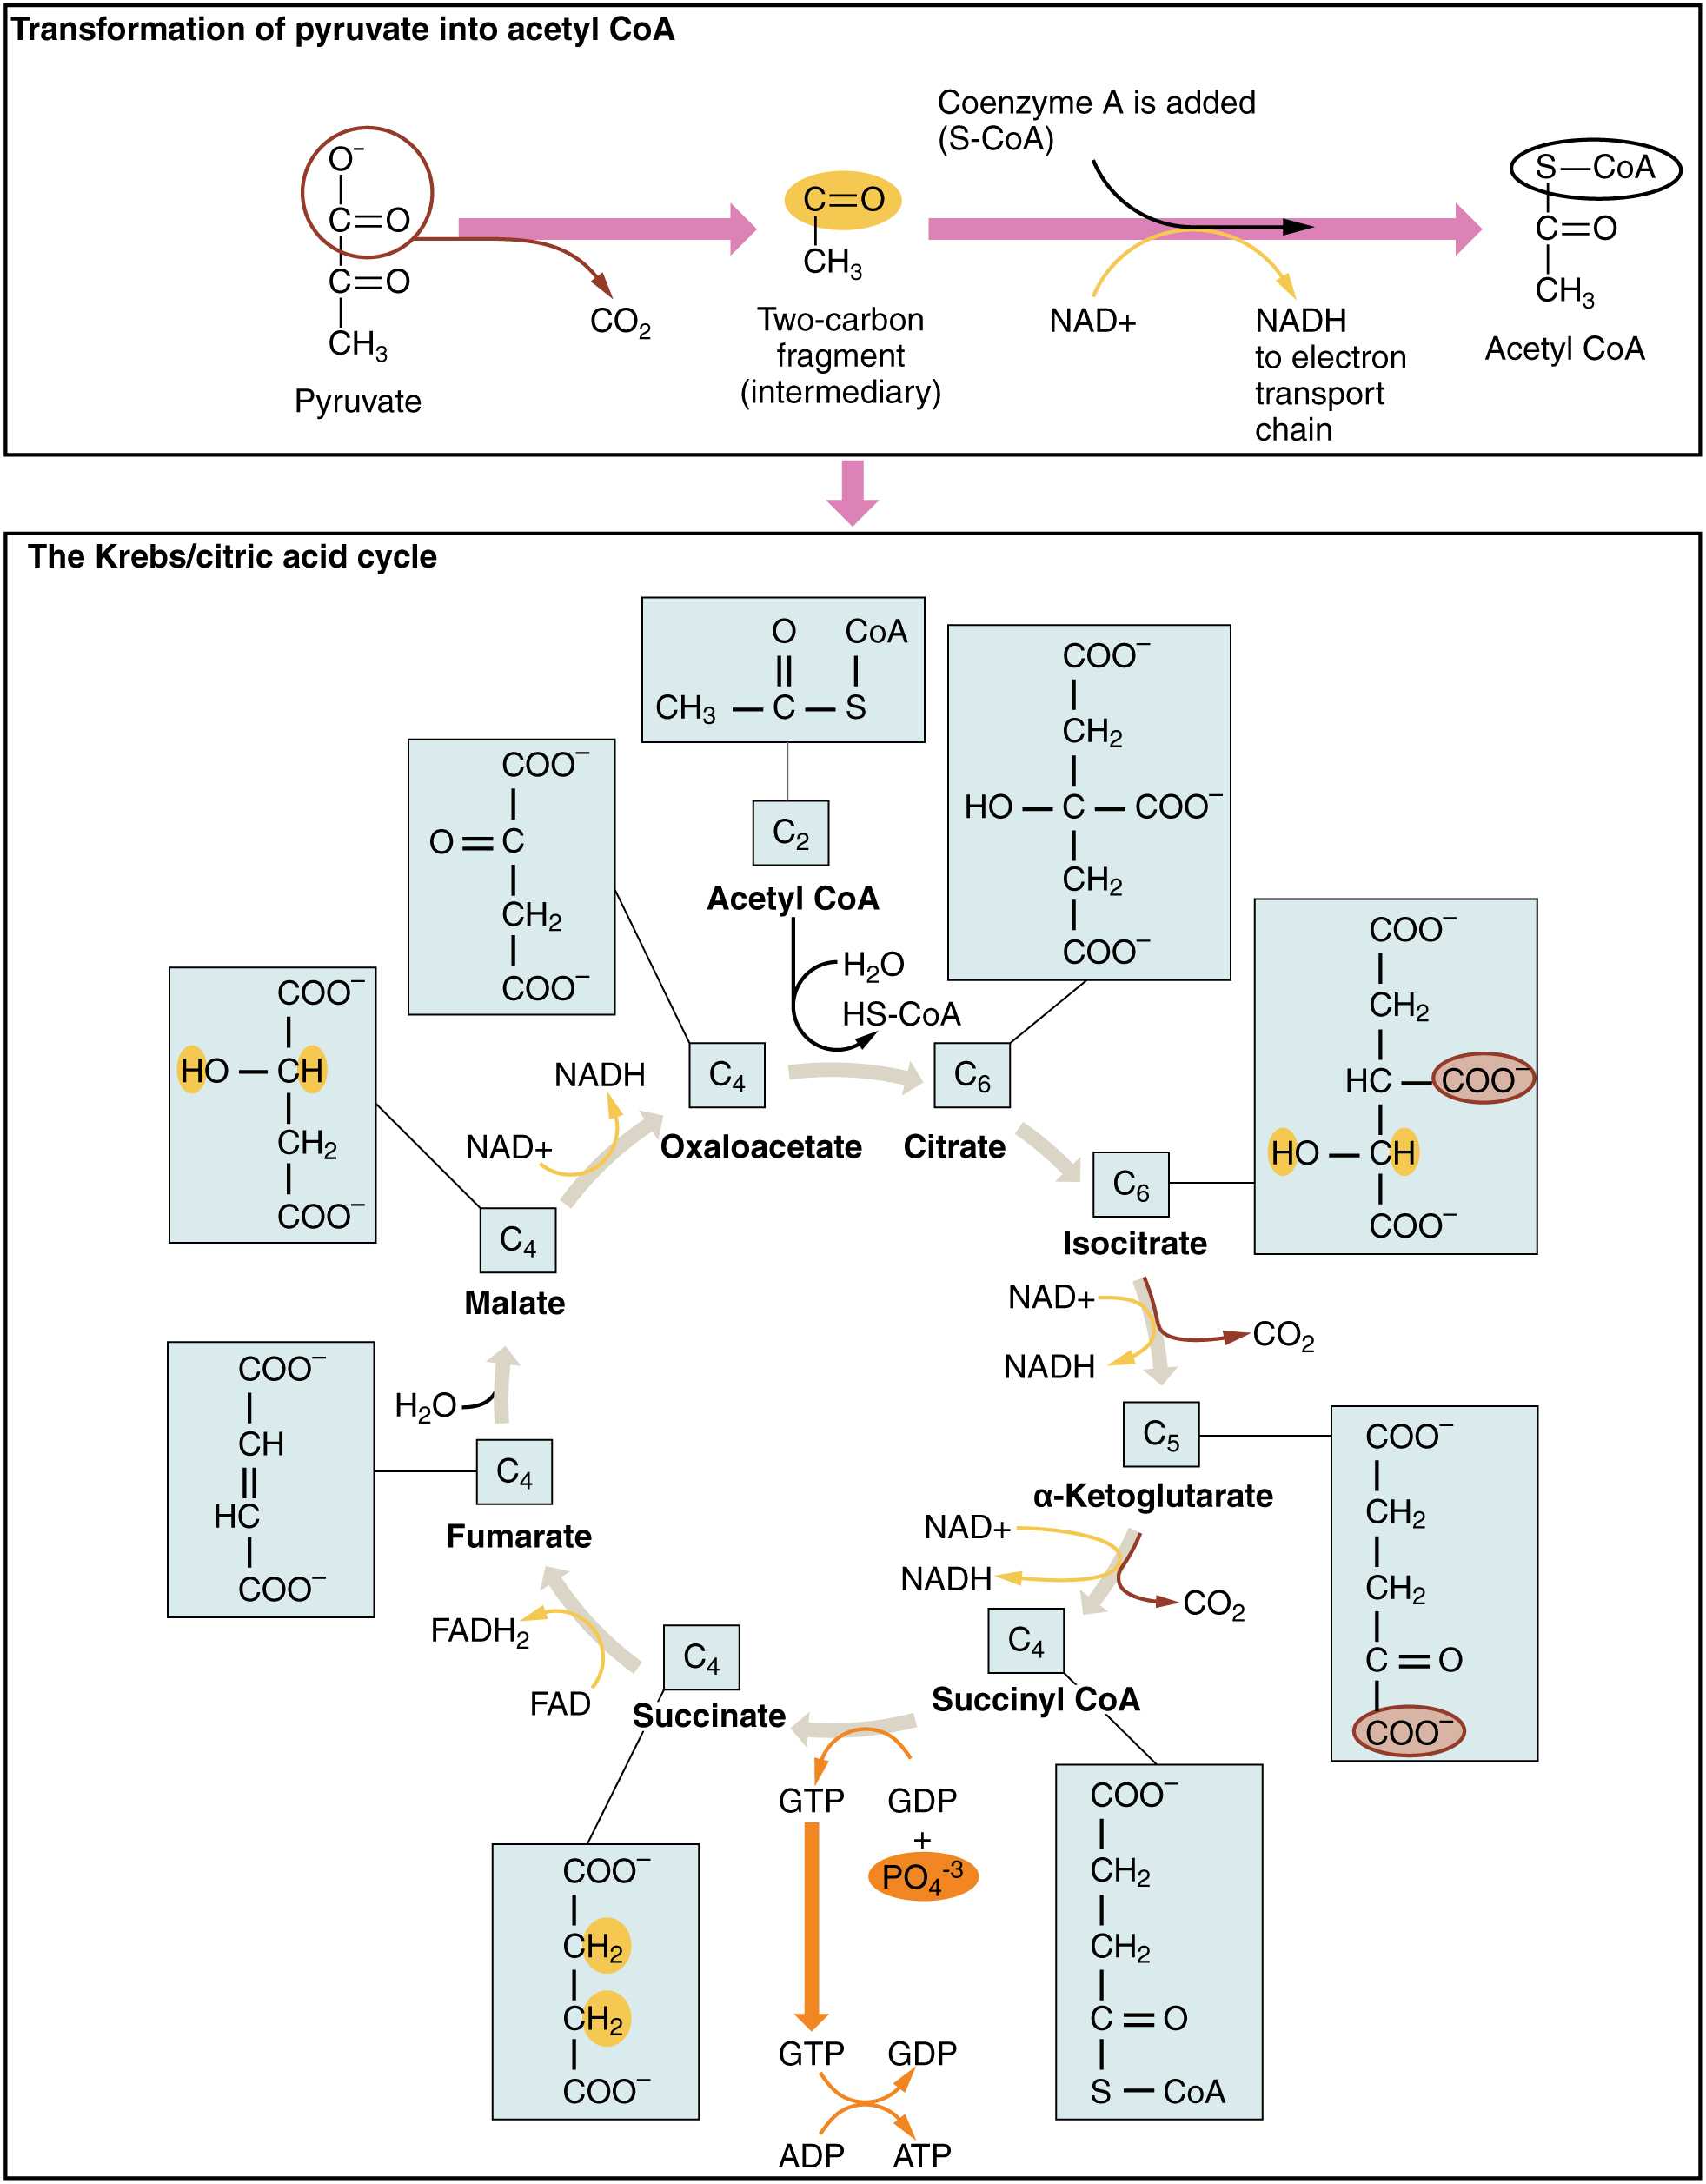 Cellular Transport and the Cell Cycle Worksheet as Well as 24 2 Carbohydrate Metabolism – Anatomy and Physiology